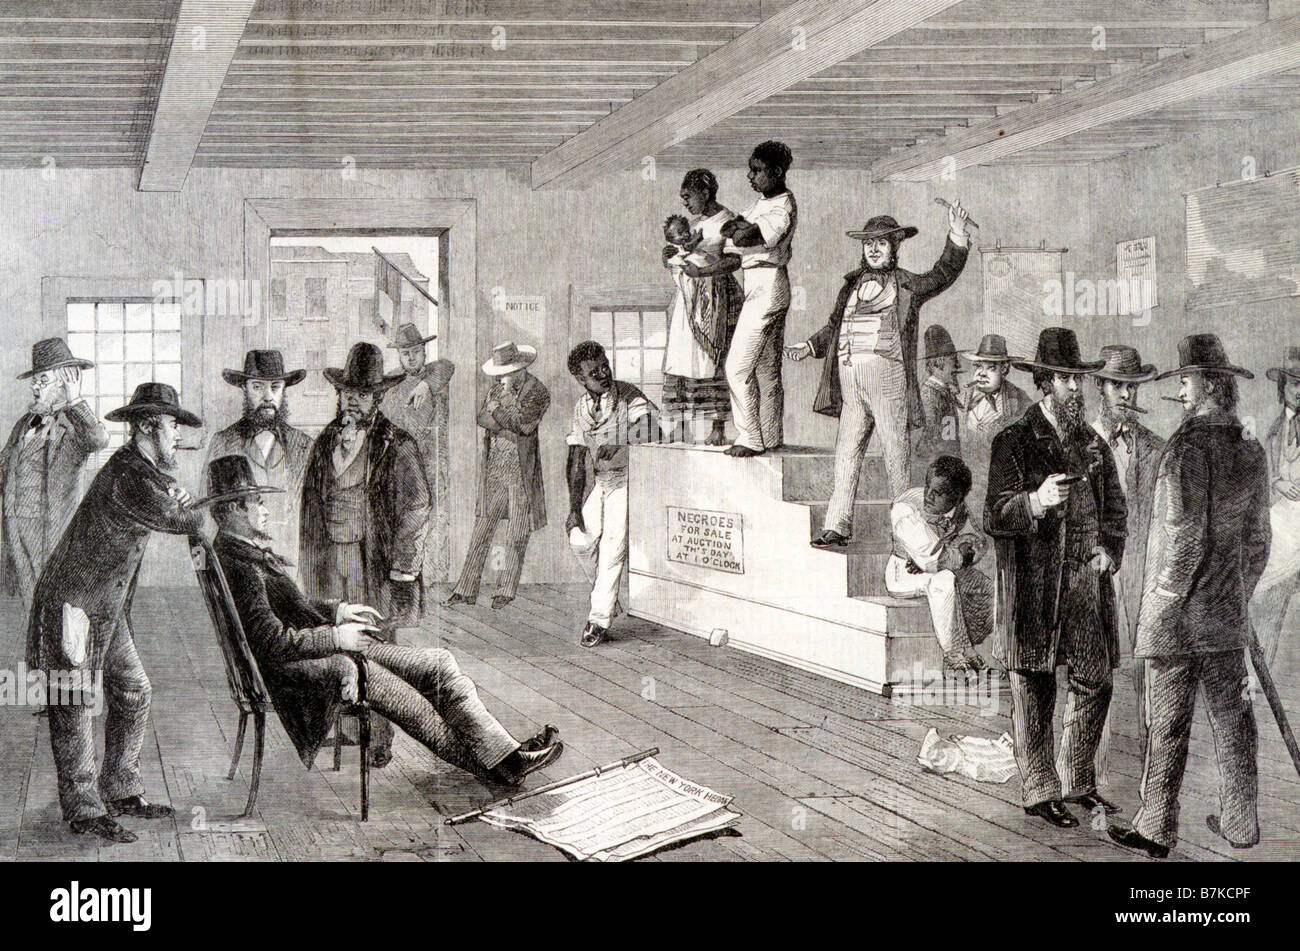 SLAVE AUCTION In Virginia About 1861 Stock Photo Alamy